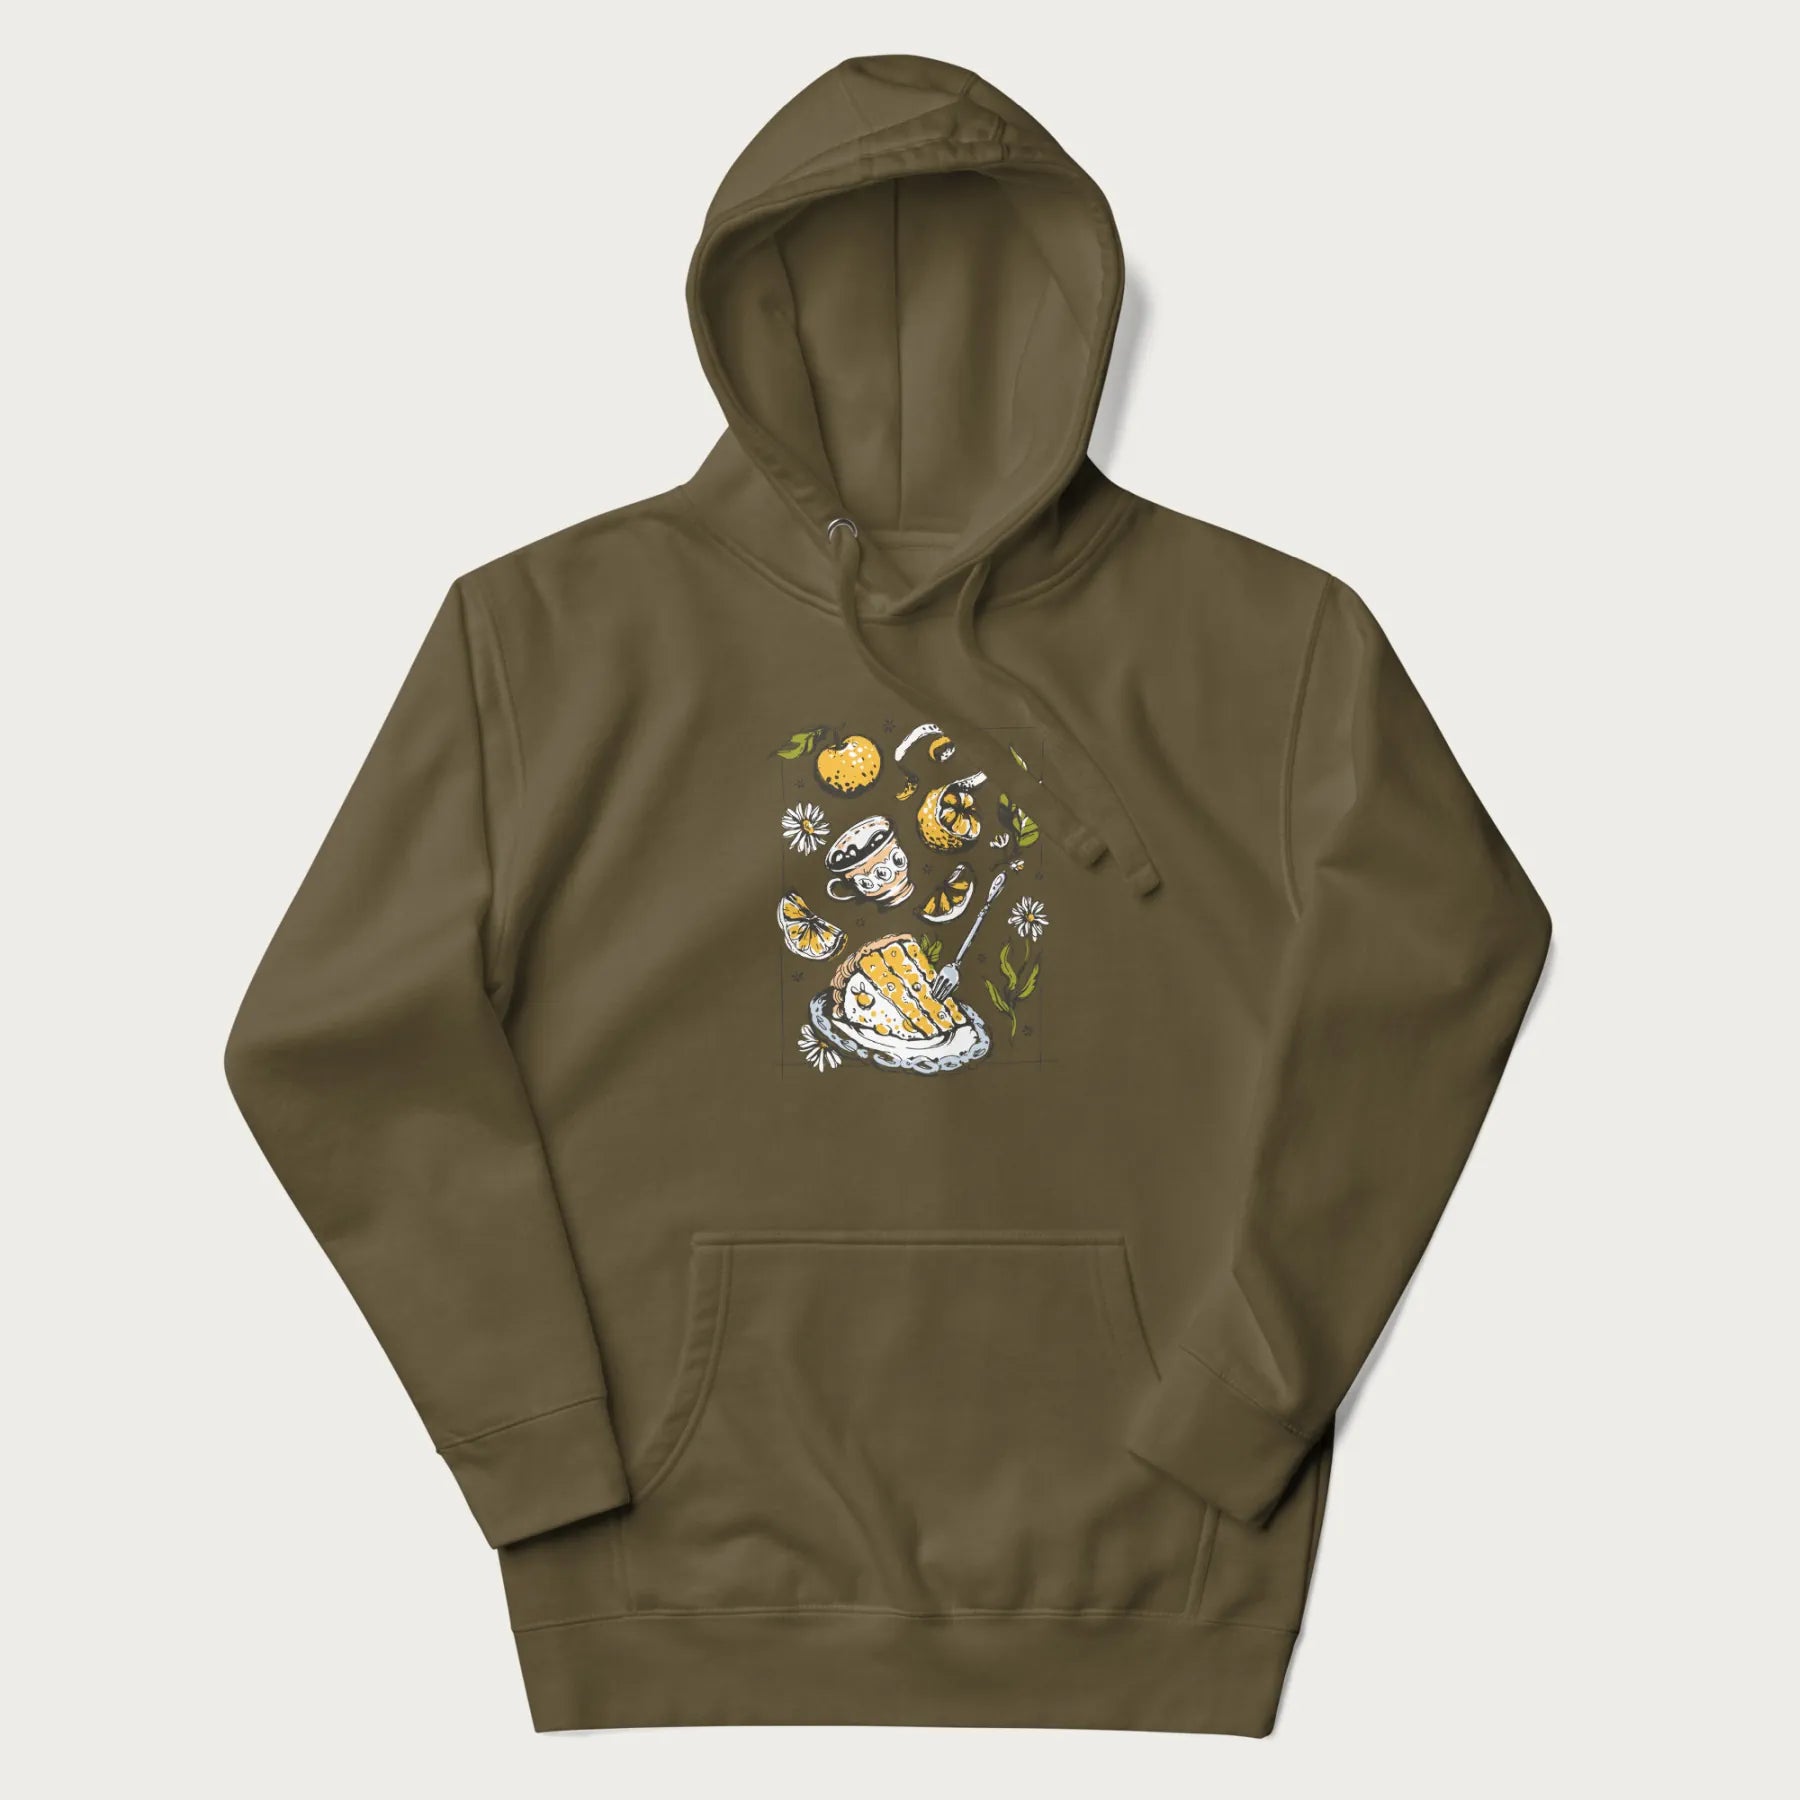 Military green hoodie featuring a Cottagecore-themed graphic with oranges, a floral porcelain cup, orange pie, and daisies.